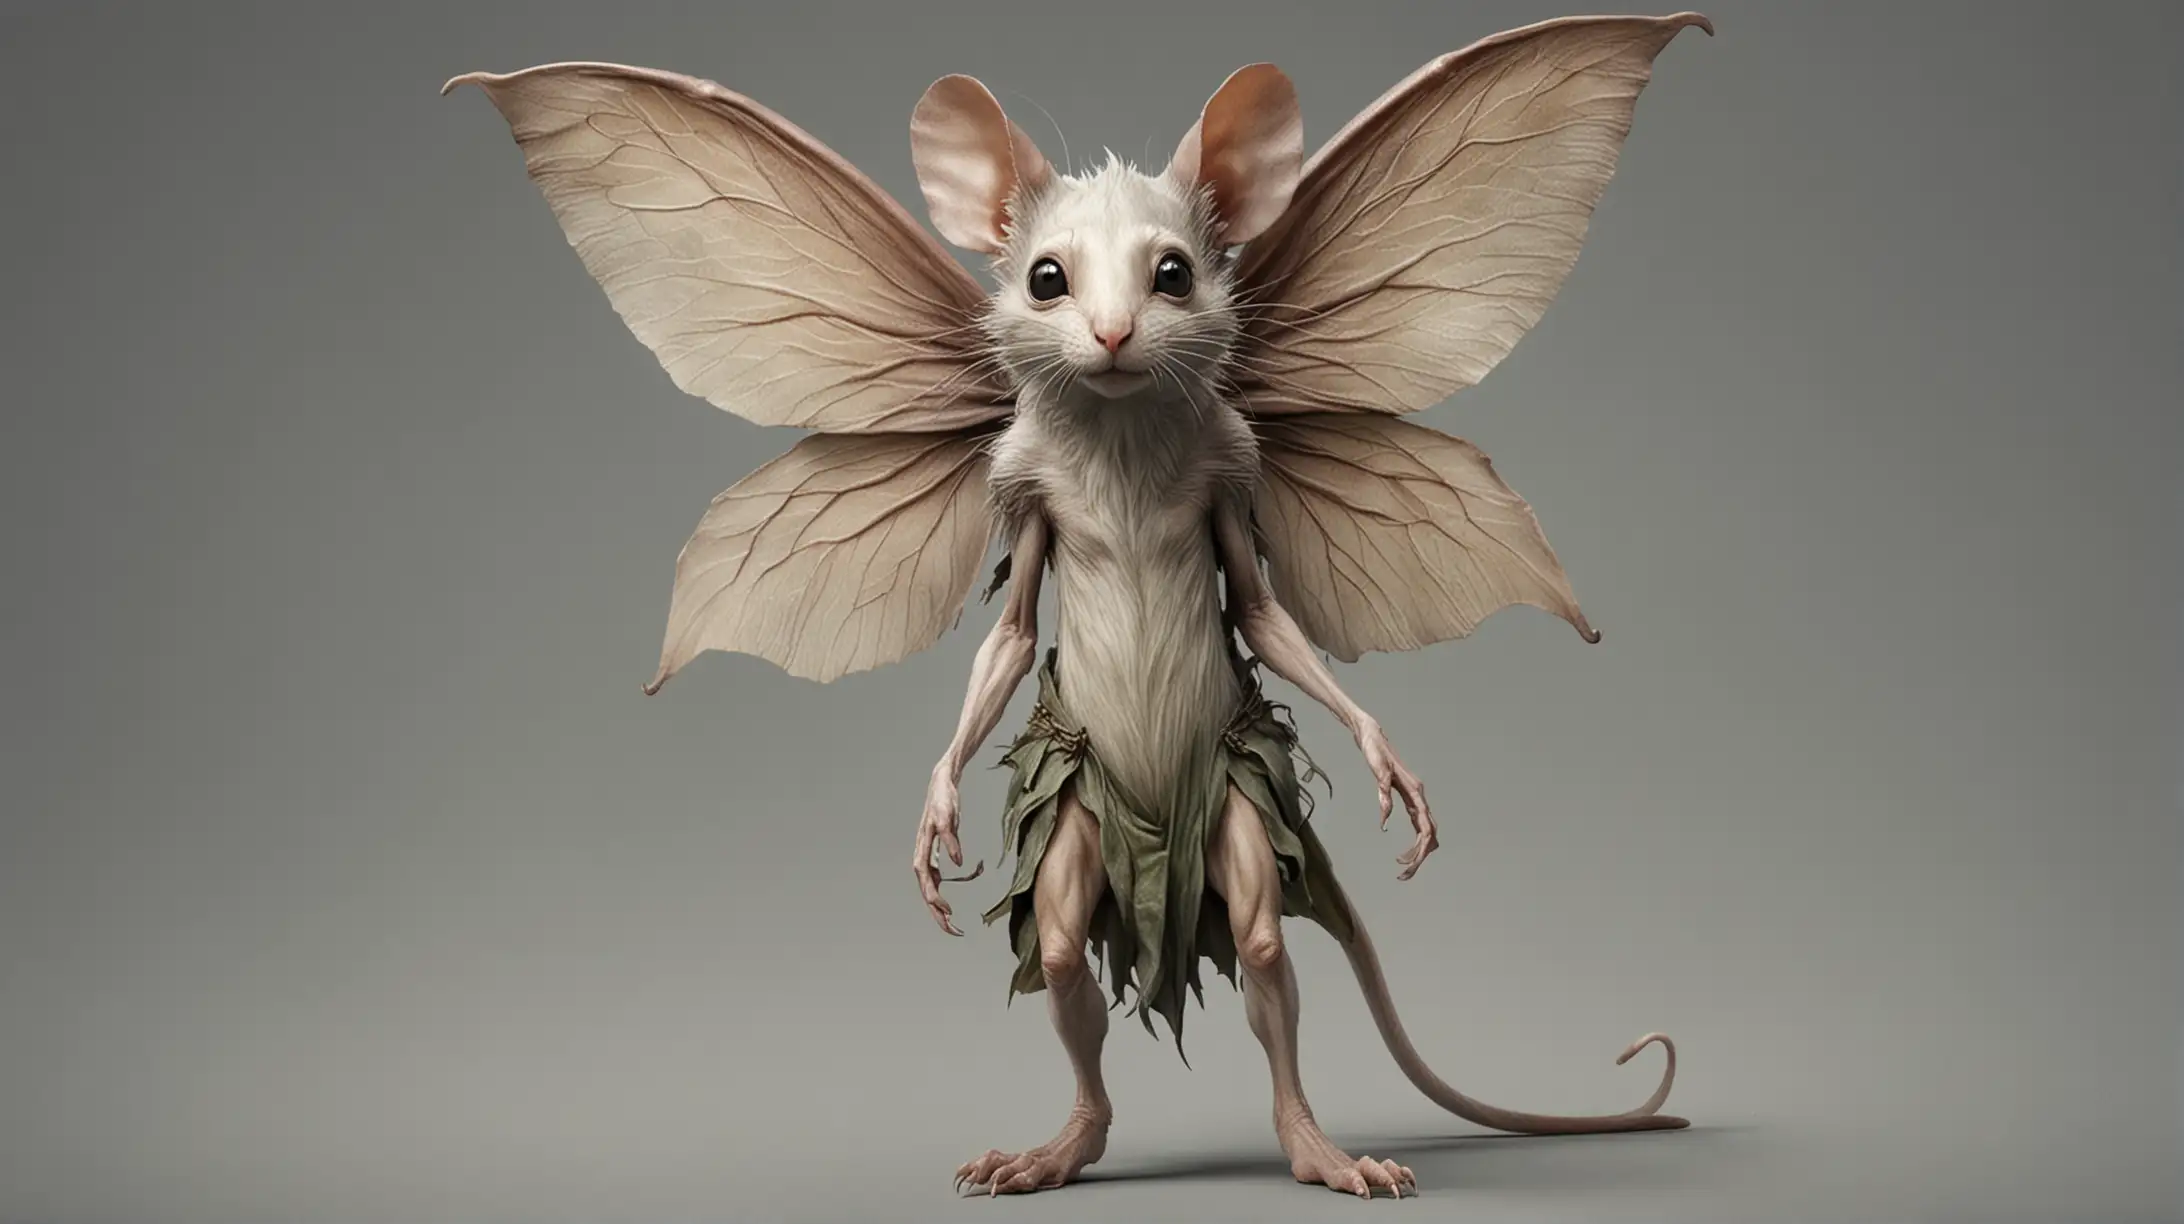 A fictional creature.
Solitary. A lone

pixie
in the style of Brian Froud

with the features of a

mouse
.
Full length view.
Highly detailed, 4k, hyper-realistic.
Isolated on a neutral gray background.